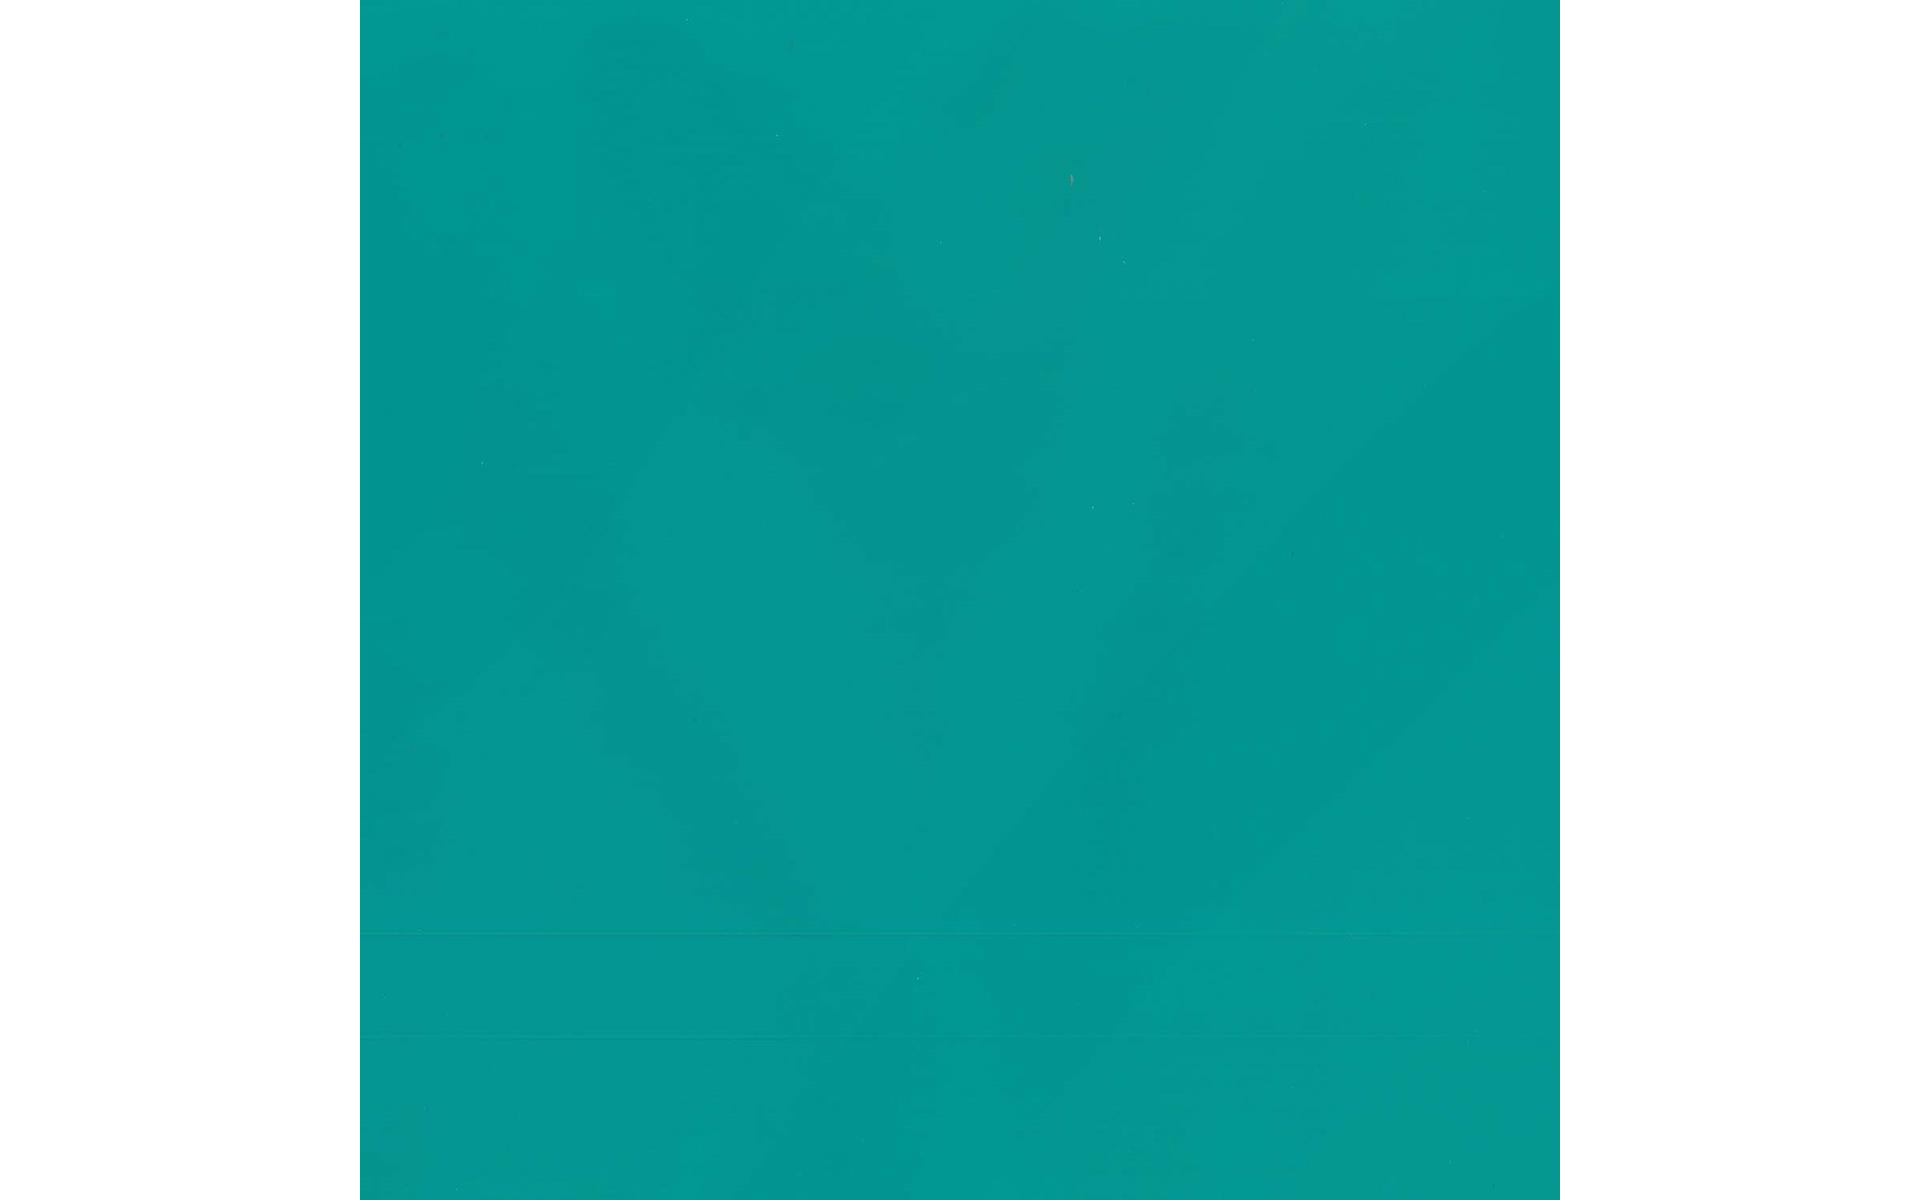 PA Vinyl Sheets 12 piece, Turquoise, Permanent, Adhesive, Glossy &  Waterproof, 12 x 12 Sheets for Cricut, Silhouette, Cameo, Craft Cutters,  Printers, Crafts and Decals